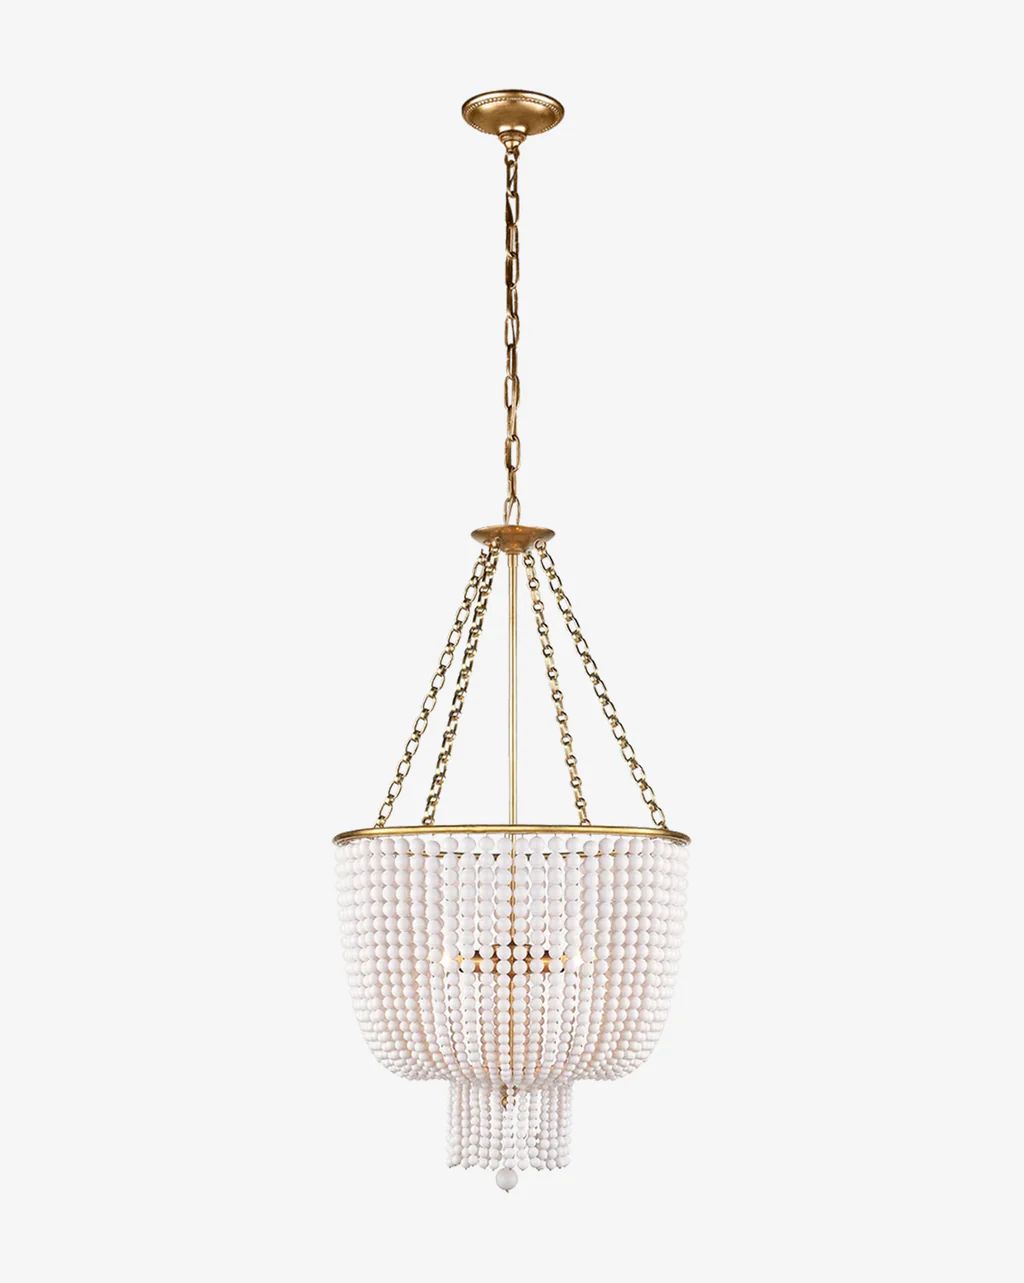 Jacqueline Small Chandelier | McGee & Co.